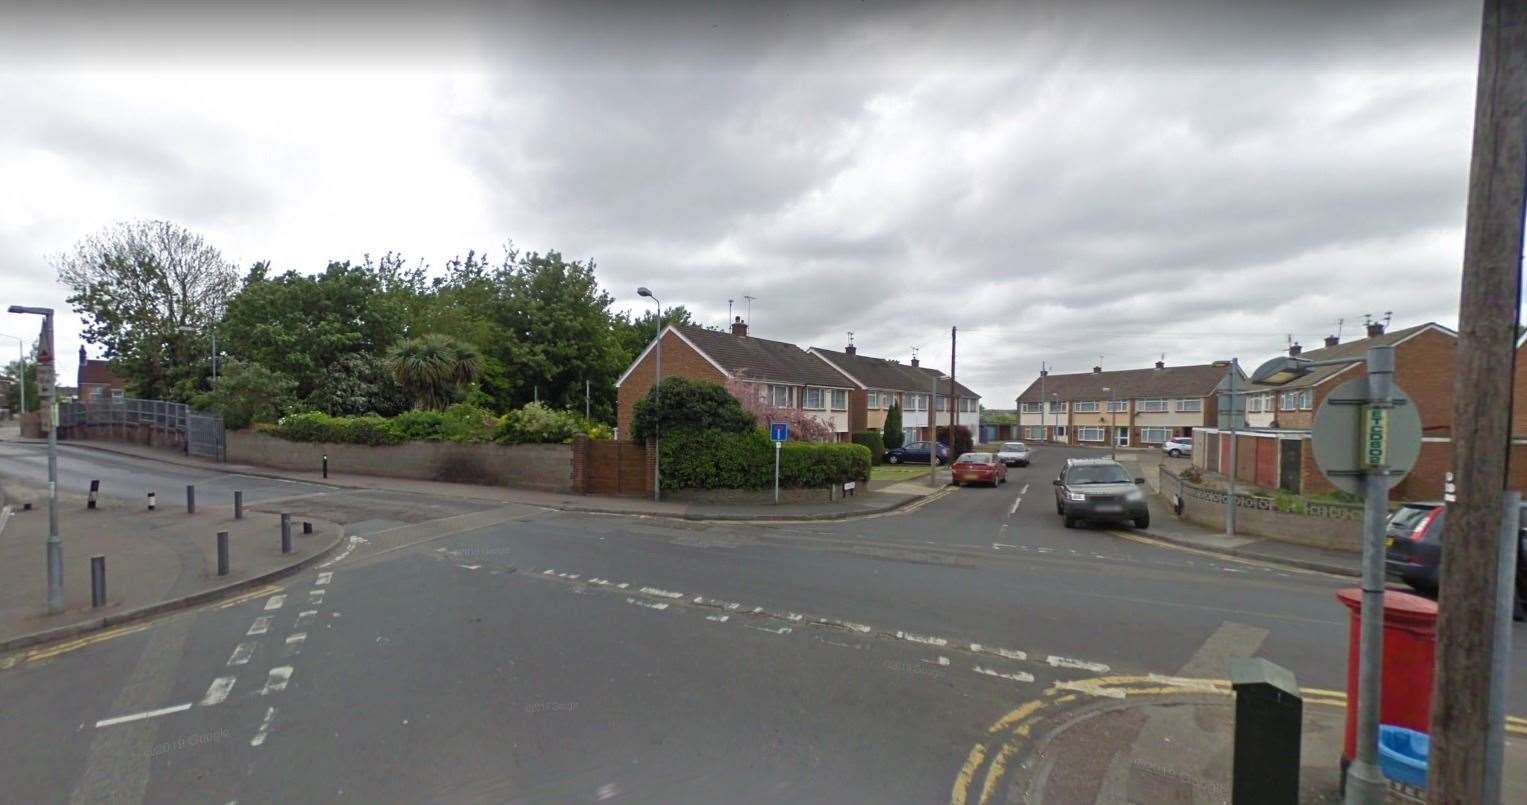 Police arrested a man after being called to a disturbance in Church Road, Murston. Picture: Google (37016125)